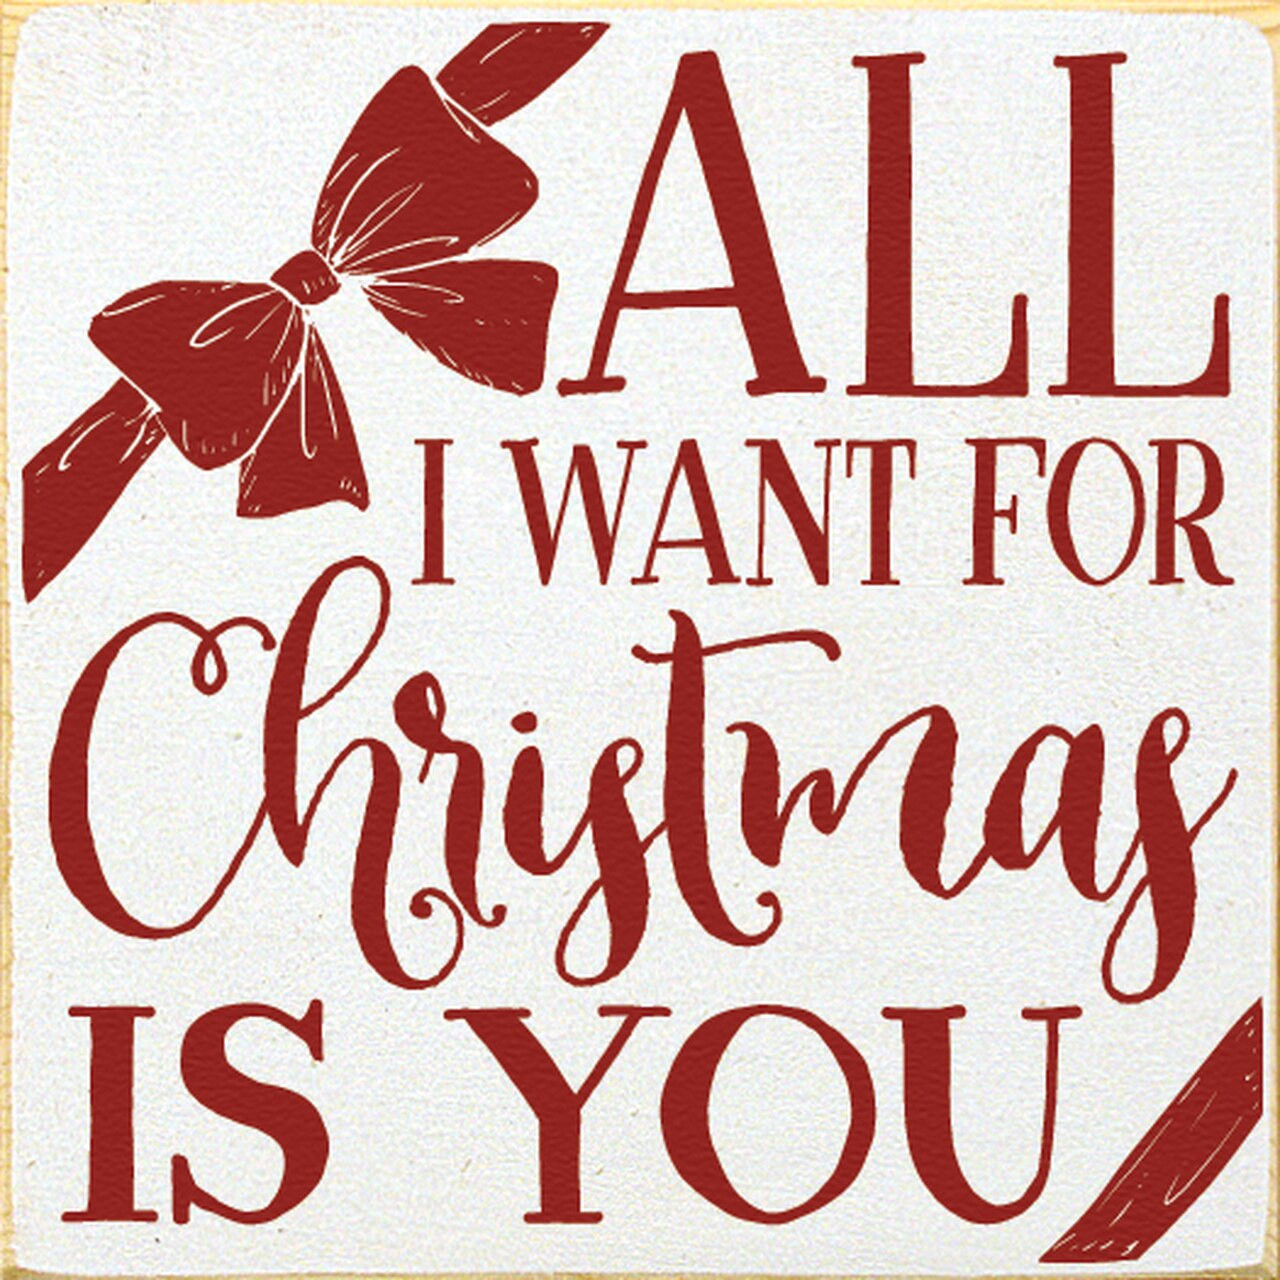 All I Want for Christmas Is You - Wikipedia